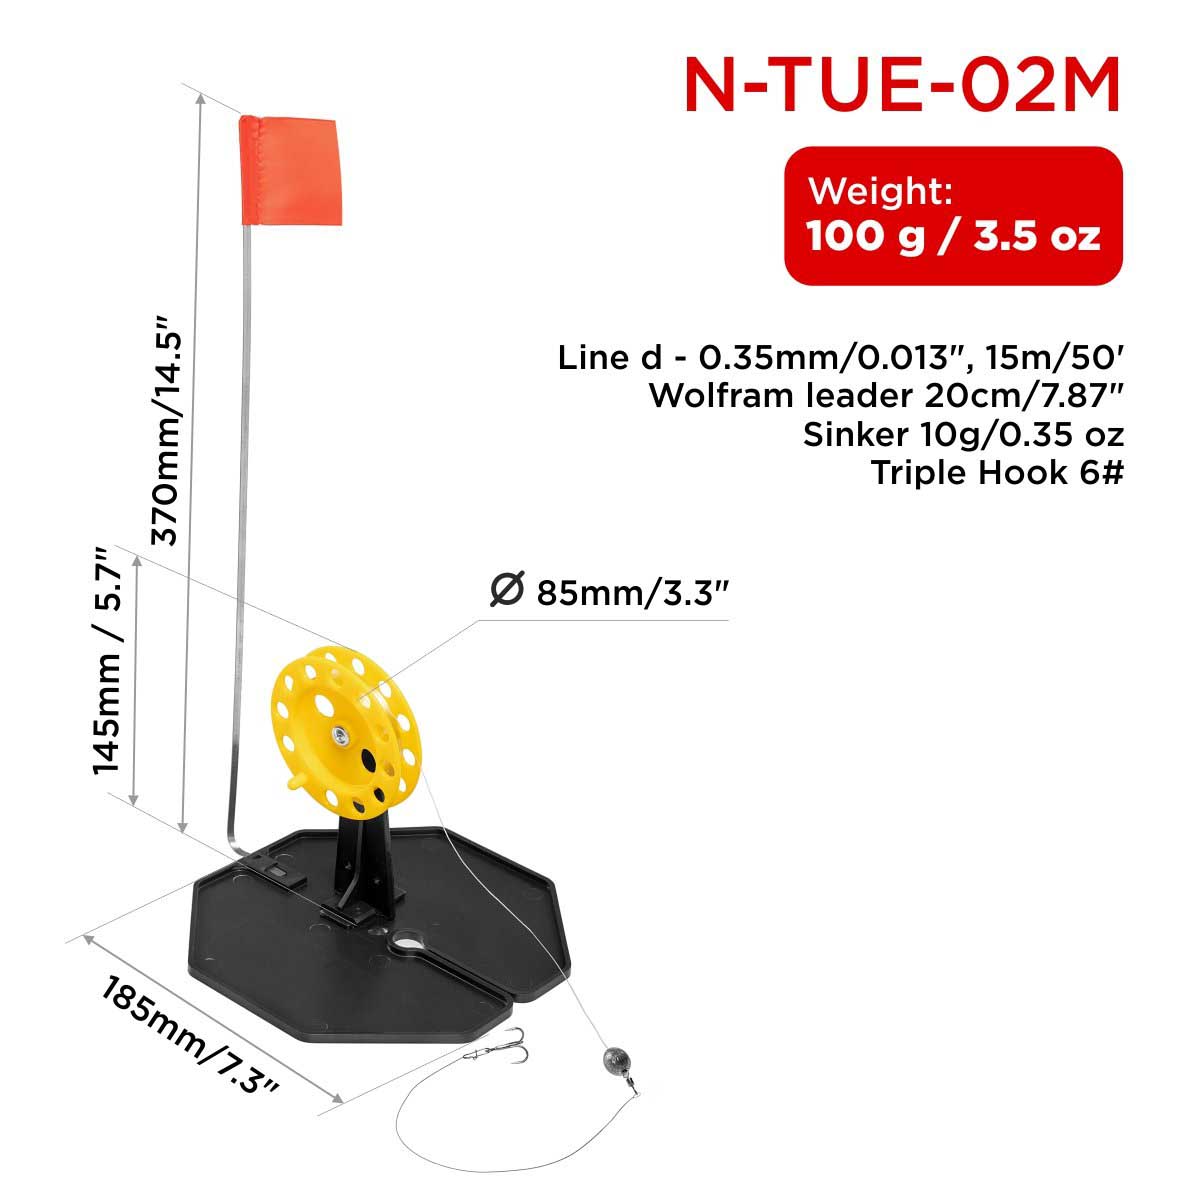 Equipped Tip-up Pop-Up Integrated Hole-Cover Easy to Clip N-TUE-02M weighs 3.5 oz, the base is 7.3 inches long, the flag shaft is 14.5 inches, the spool diameter is 3.3 inches and its height is 5.7 inches. Equipped with a 50 ft of 0.35mm fishing line, a 7.87 inches wolfram leader, a 0.35 oz sinker and a triple hook